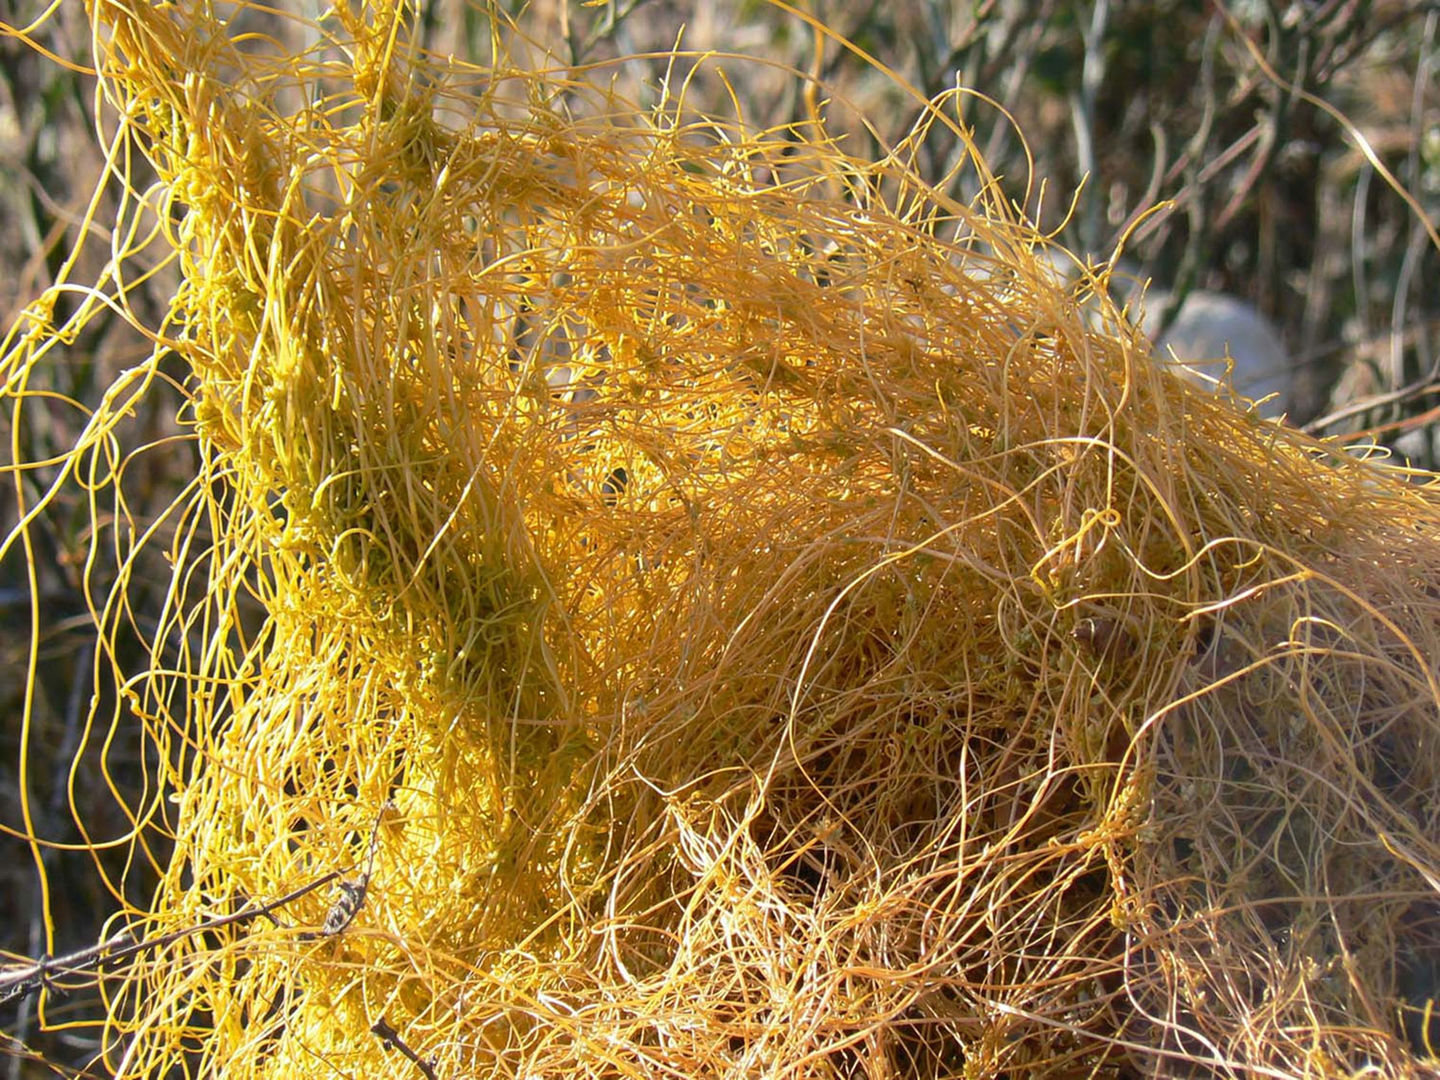 The Cuscuta plant (dodder) is a parasitic plant, which, in order to survive, obtains nutrients from the host plant.